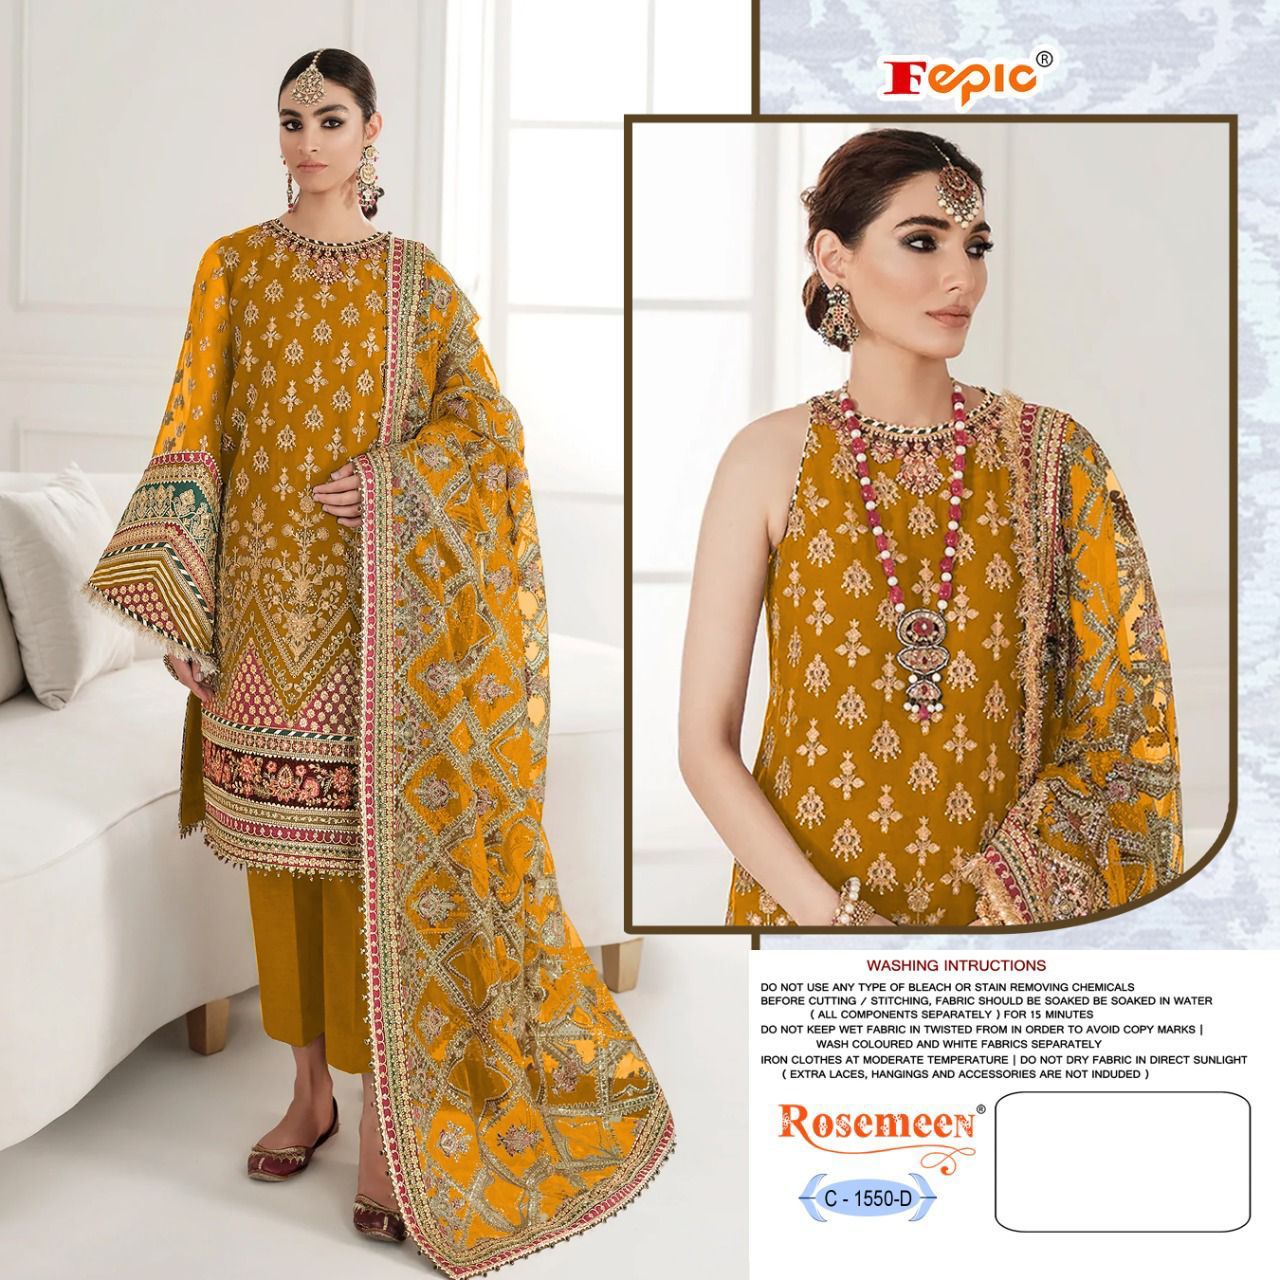 Fepic Rosemeen D.no. C 1550 Organza With Embroidery Work Salwar Kameez At Wholesale Rate - jilaniwholesalesuit